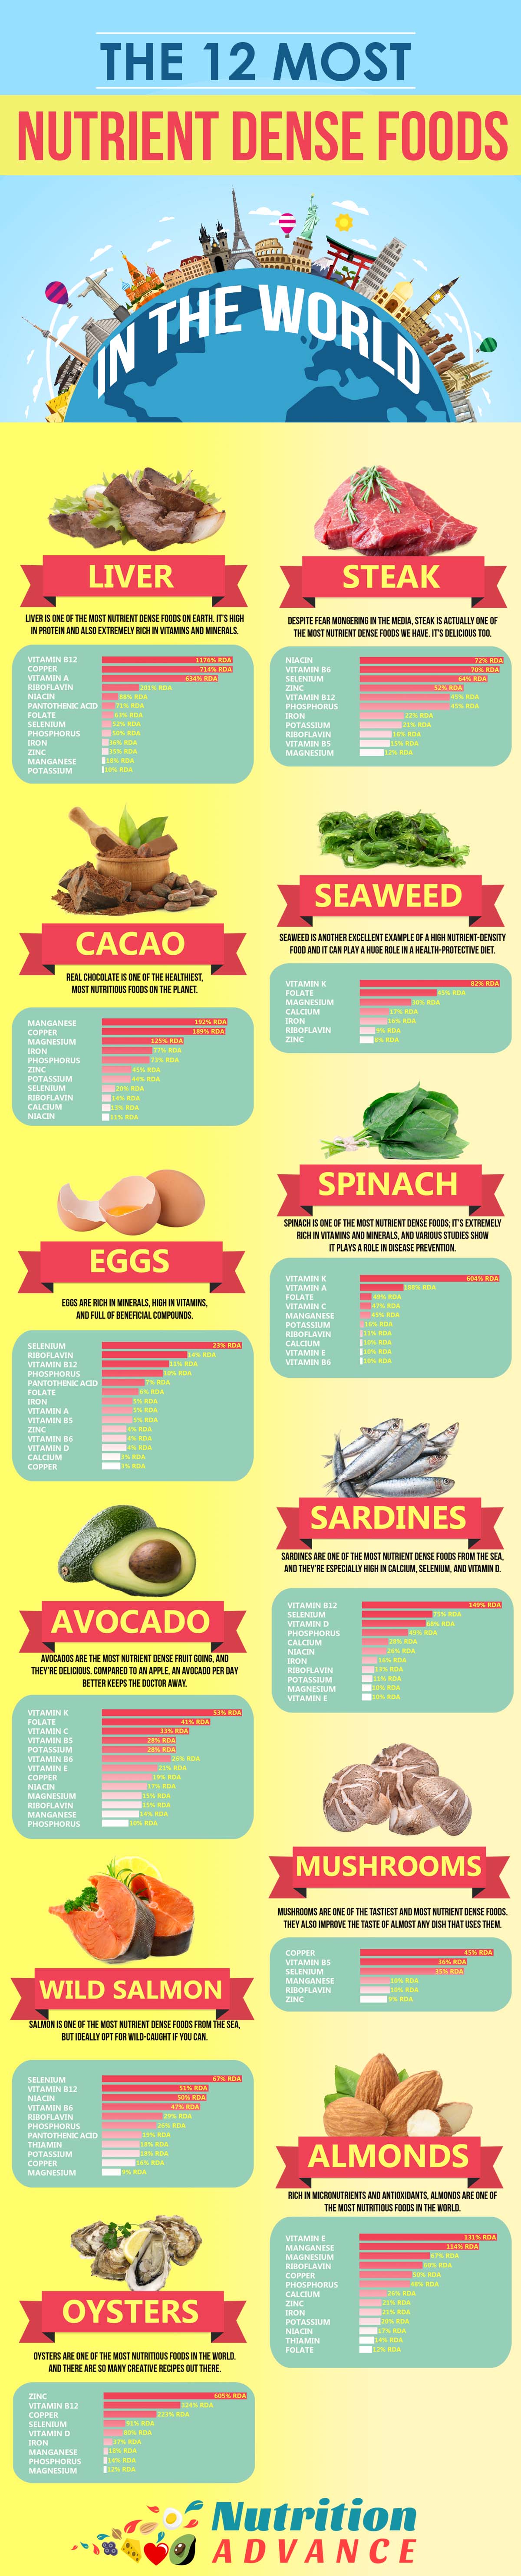 Top 12 Most Nutrient Dense Foods On The Planet Infographic